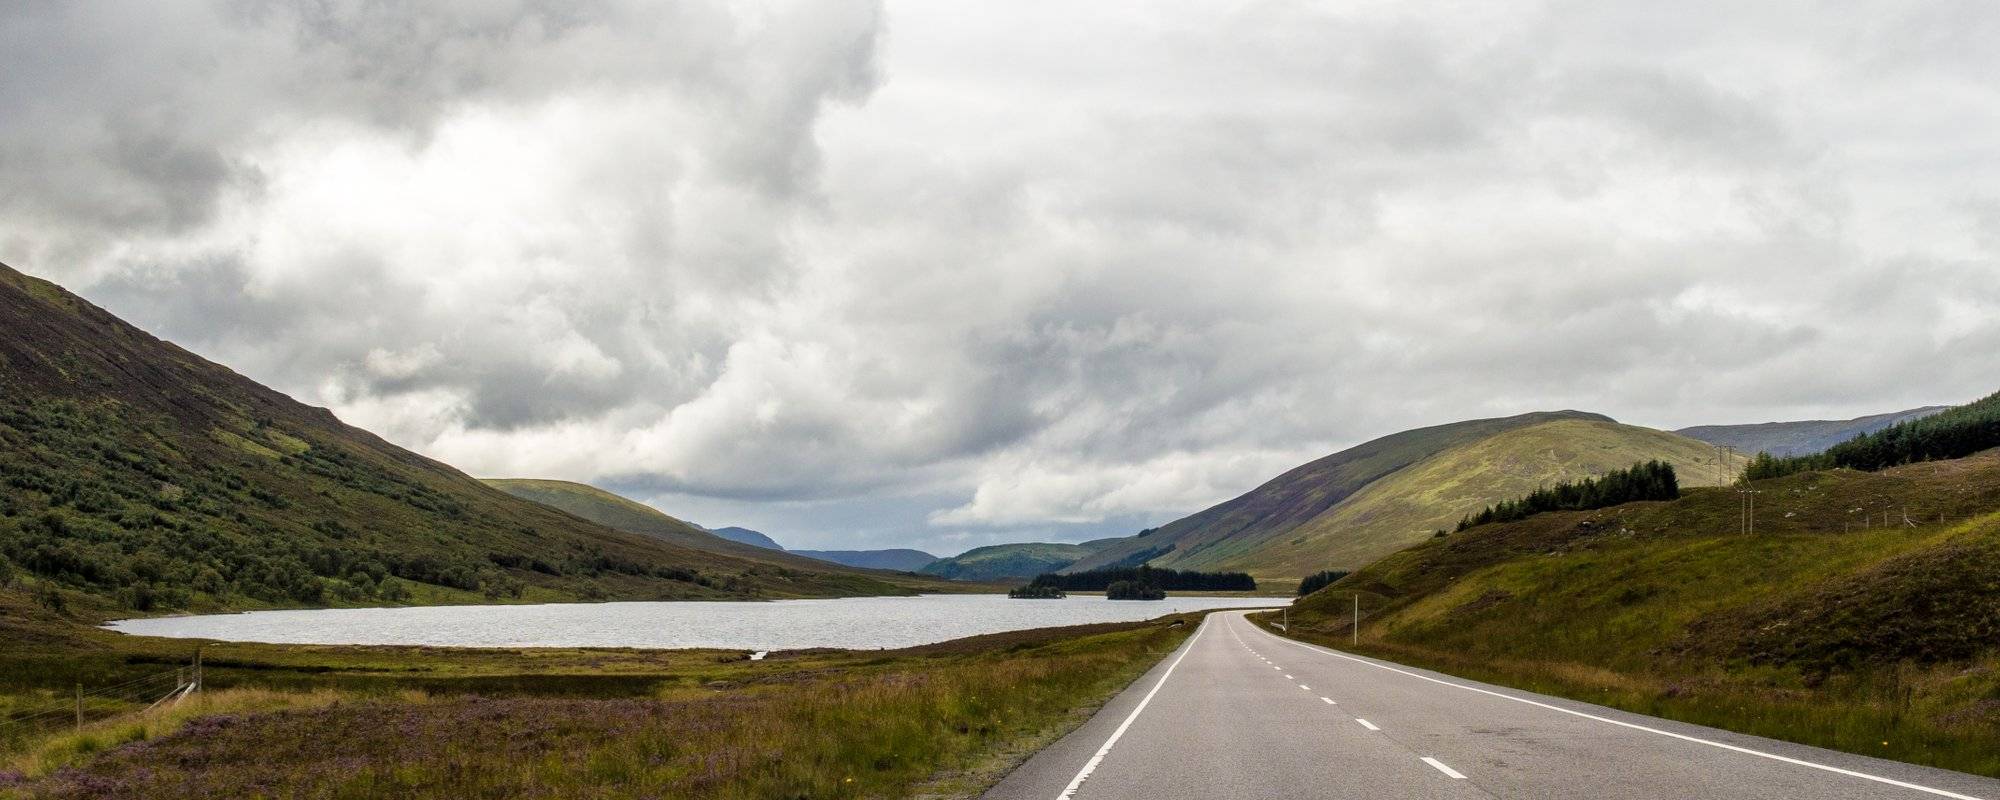 The North-Coast 500: from Inverness to Lochcarron via Applecross [First leg]